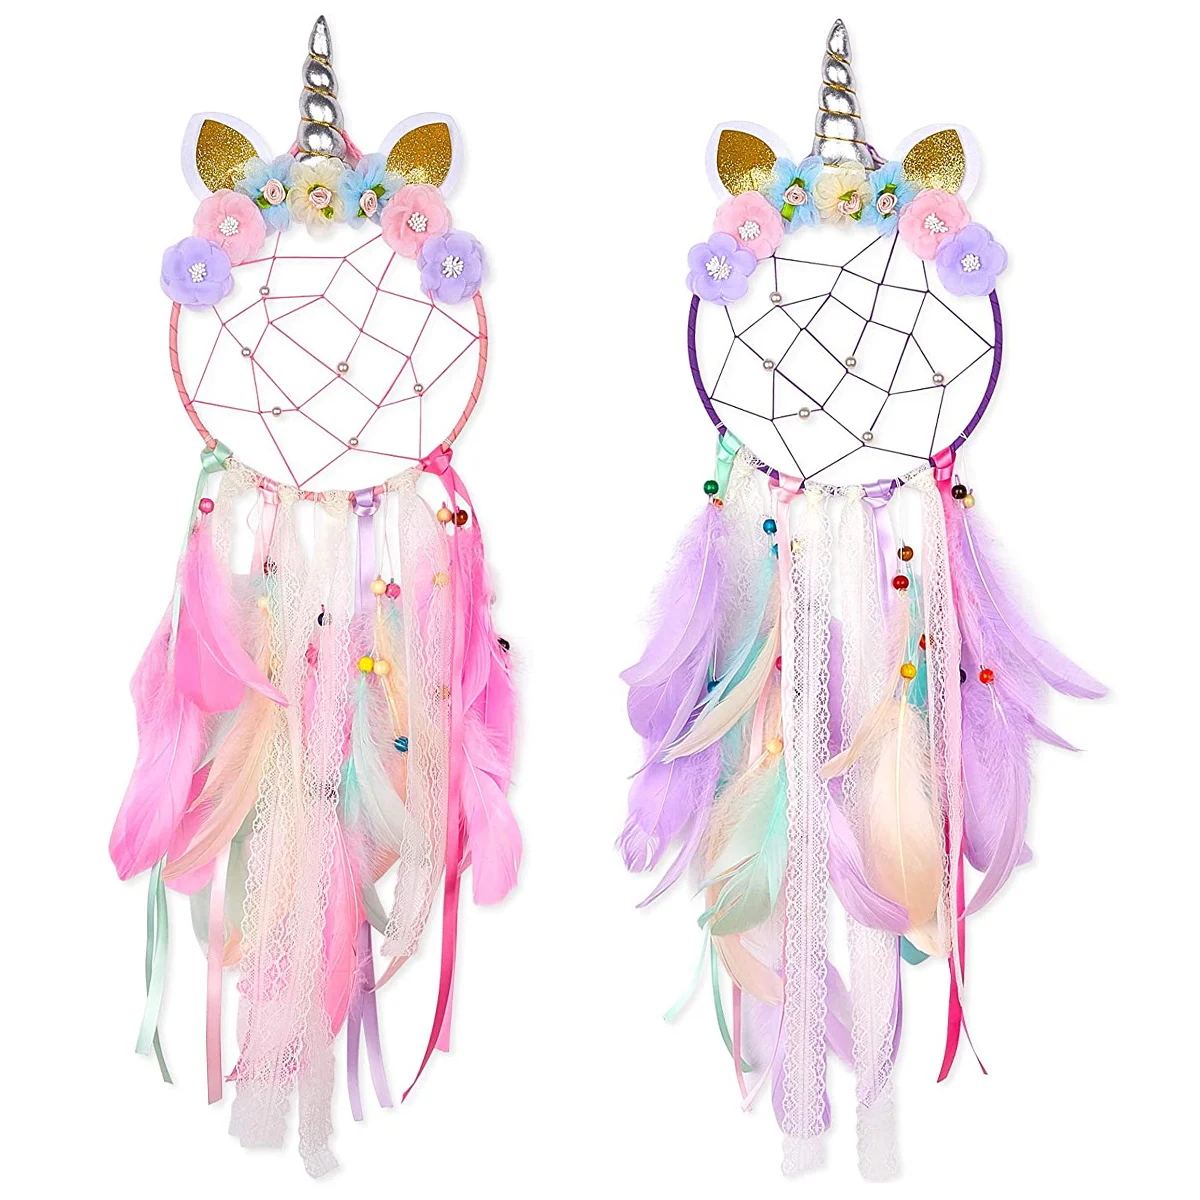 Unicorn Dream Catchers Colorful True feather Dream Catcher Home Decor Dream Catcher girls birthday gifts for Kids Home Decor